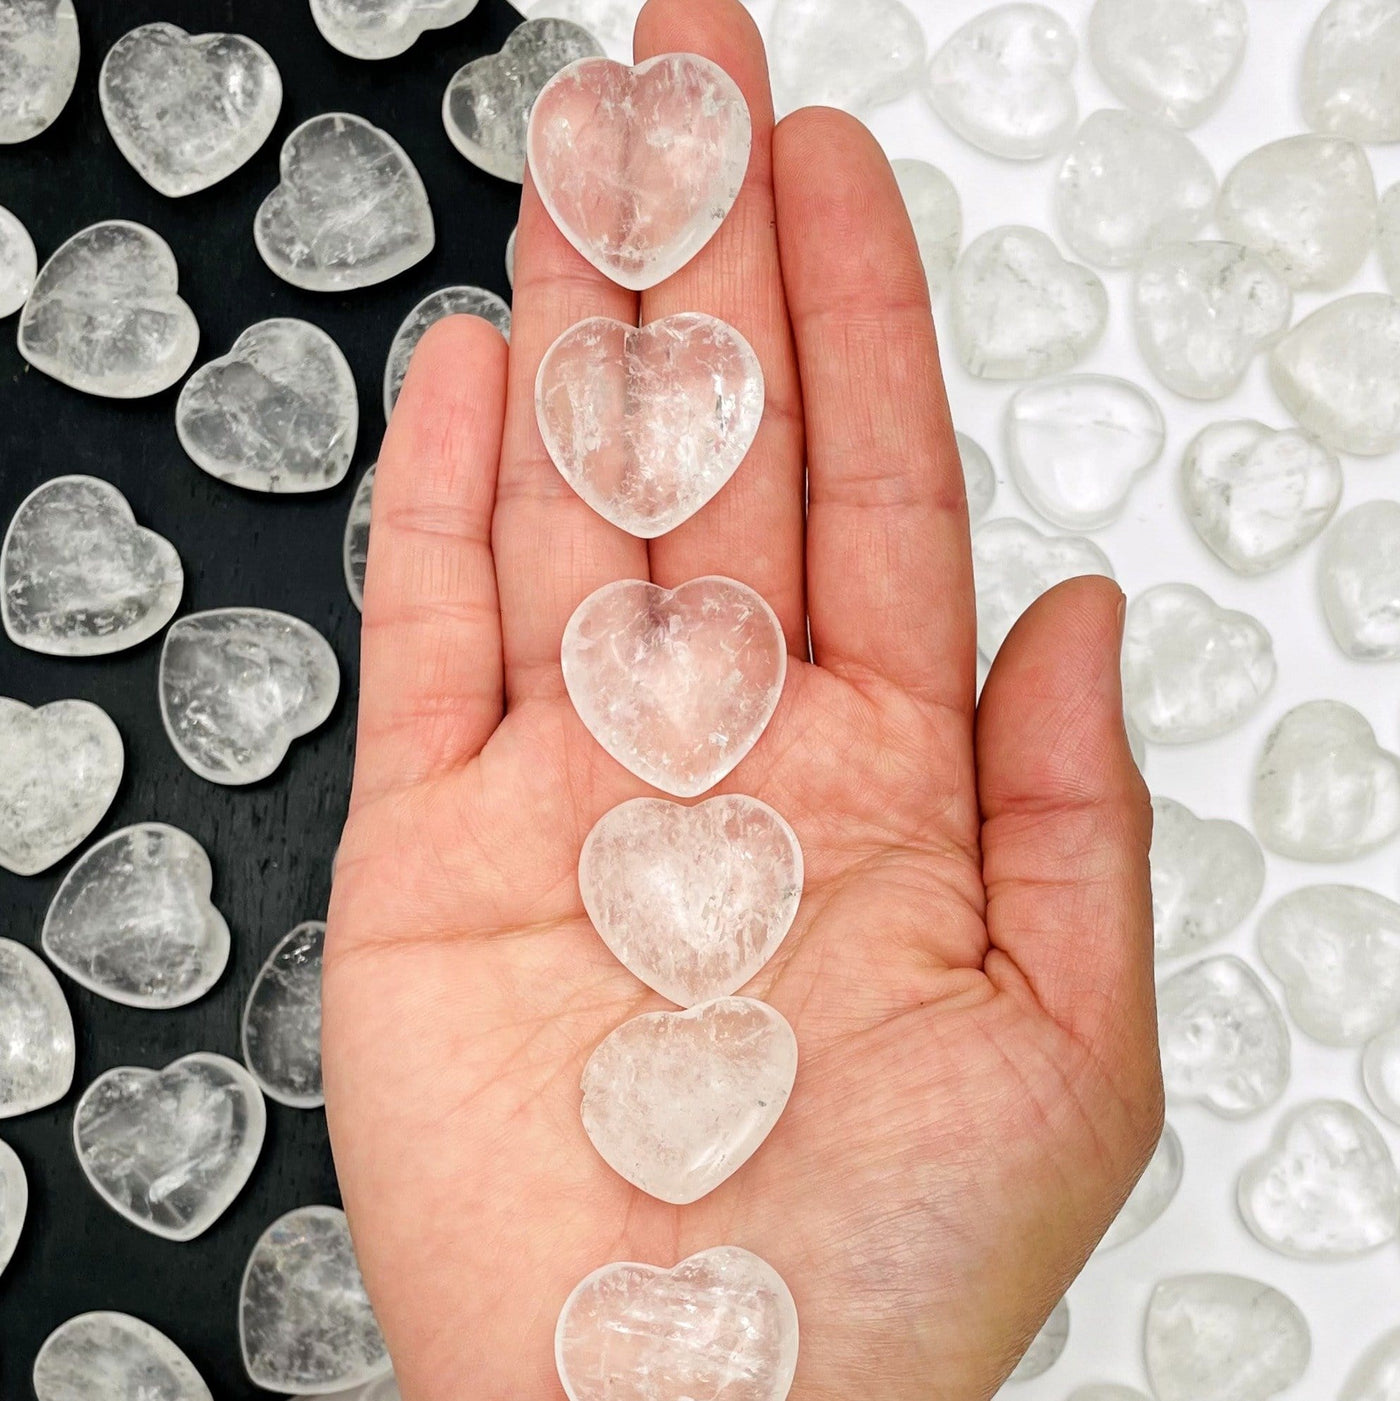 crystal quartz hearts displayed on hand for size reference